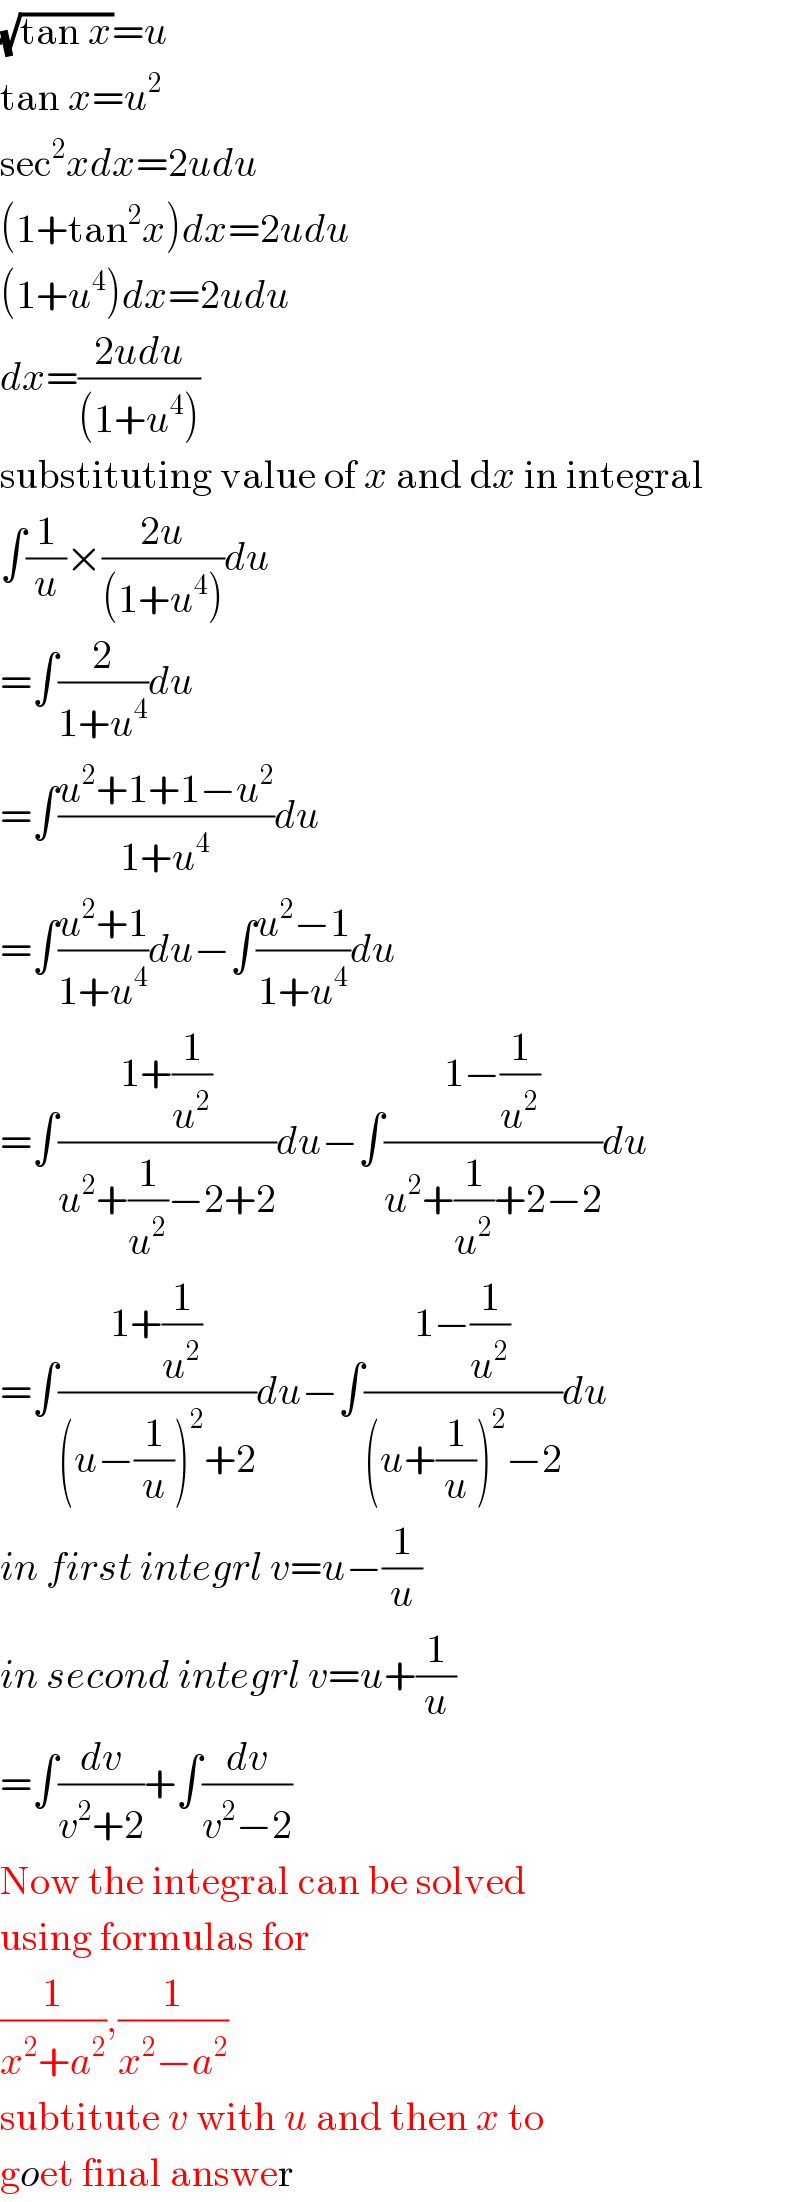 (√(tan x))=u  tan x=u^2   sec^2 xdx=2udu  (1+tan^2 x)dx=2udu  (1+u^4 )dx=2udu  dx=((2udu)/((1+u^4 )))   substituting value of x and dx in integral  ∫(1/u)×((2u)/((1+u^4 )))du  =∫(2/(1+u^4 ))du  =∫((u^2 +1+1−u^2 )/(1+u^4 ))du  =∫((u^2 +1)/(1+u^4 ))du−∫((u^2 −1)/(1+u^4 ))du  =∫((1+(1/u^2 ))/(u^2 +(1/u^2 )−2+2))du−∫((1−(1/u^2 ))/(u^2 +(1/u^2 )+2−2))du  =∫((1+(1/u^2 ))/((u−(1/u))^2 +2))du−∫((1−(1/u^2 ))/((u+(1/u))^2 −2))du  in first integrl v=u−(1/u)  in second integrl v=u+(1/u)  =∫(dv/(v^2 +2))+∫(dv/(v^2 −2))  Now the integral can be solved  using formulas for  (1/(x^2 +a^2 )),(1/(x^2 −a^2 ))   subtitute v with u and then x to  goet final answer  